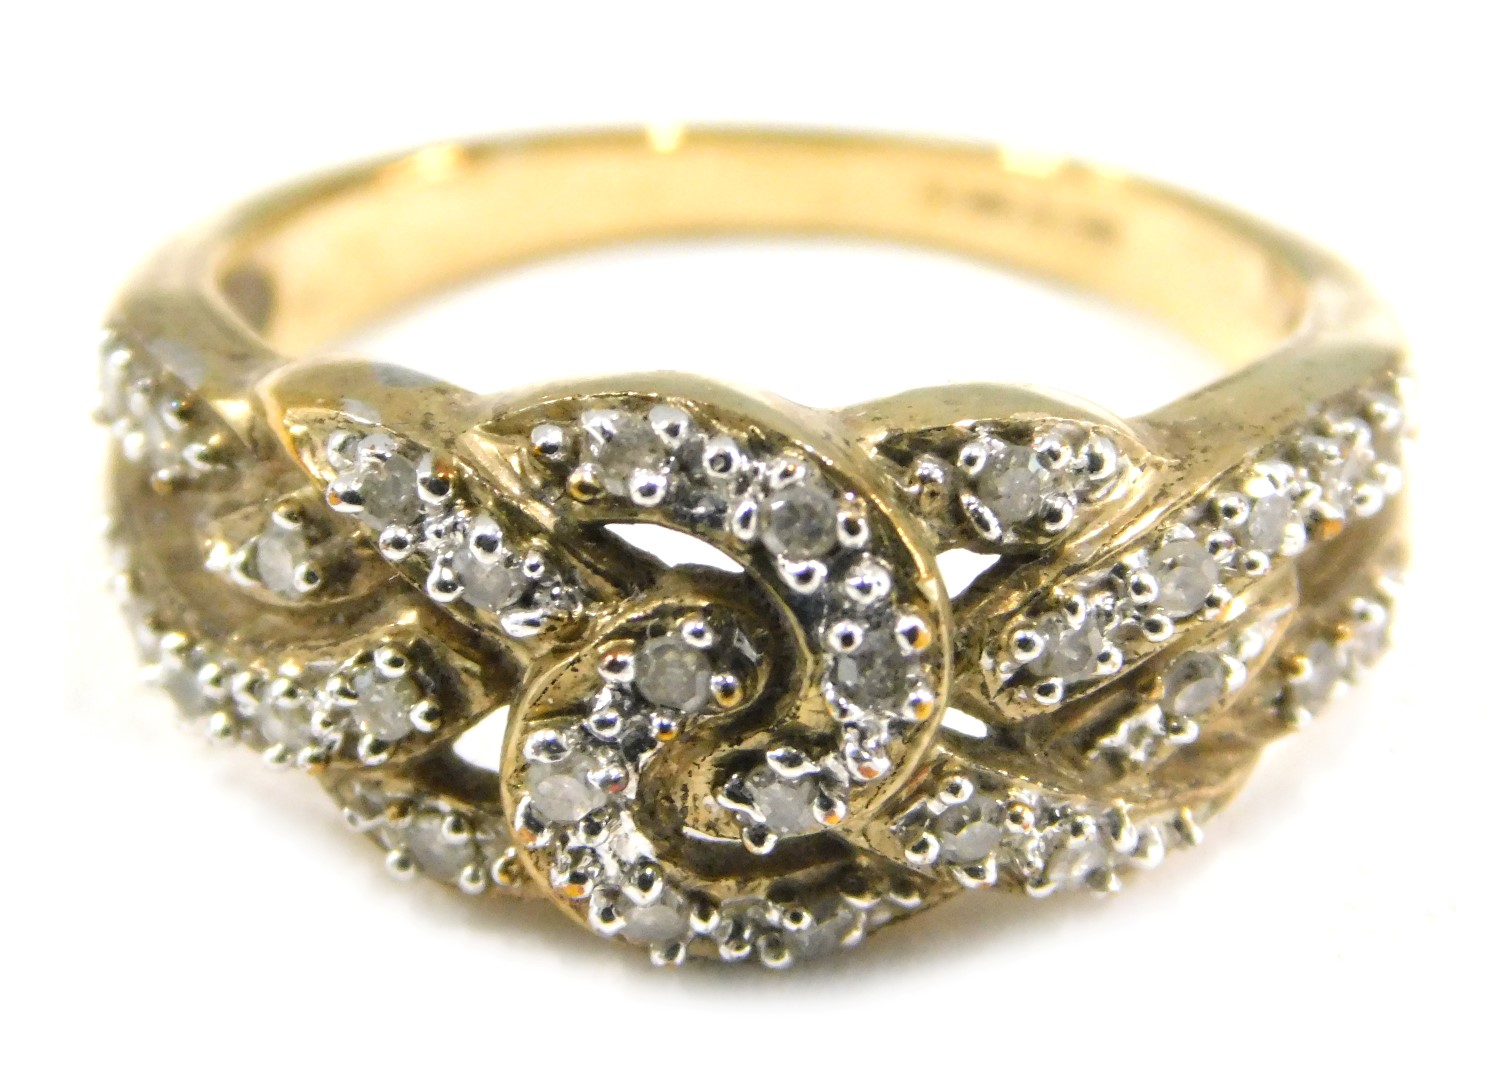 A 9ct gold and CZ set dress ring, of layered cross over design, set with tiny CZs on a yellow metal